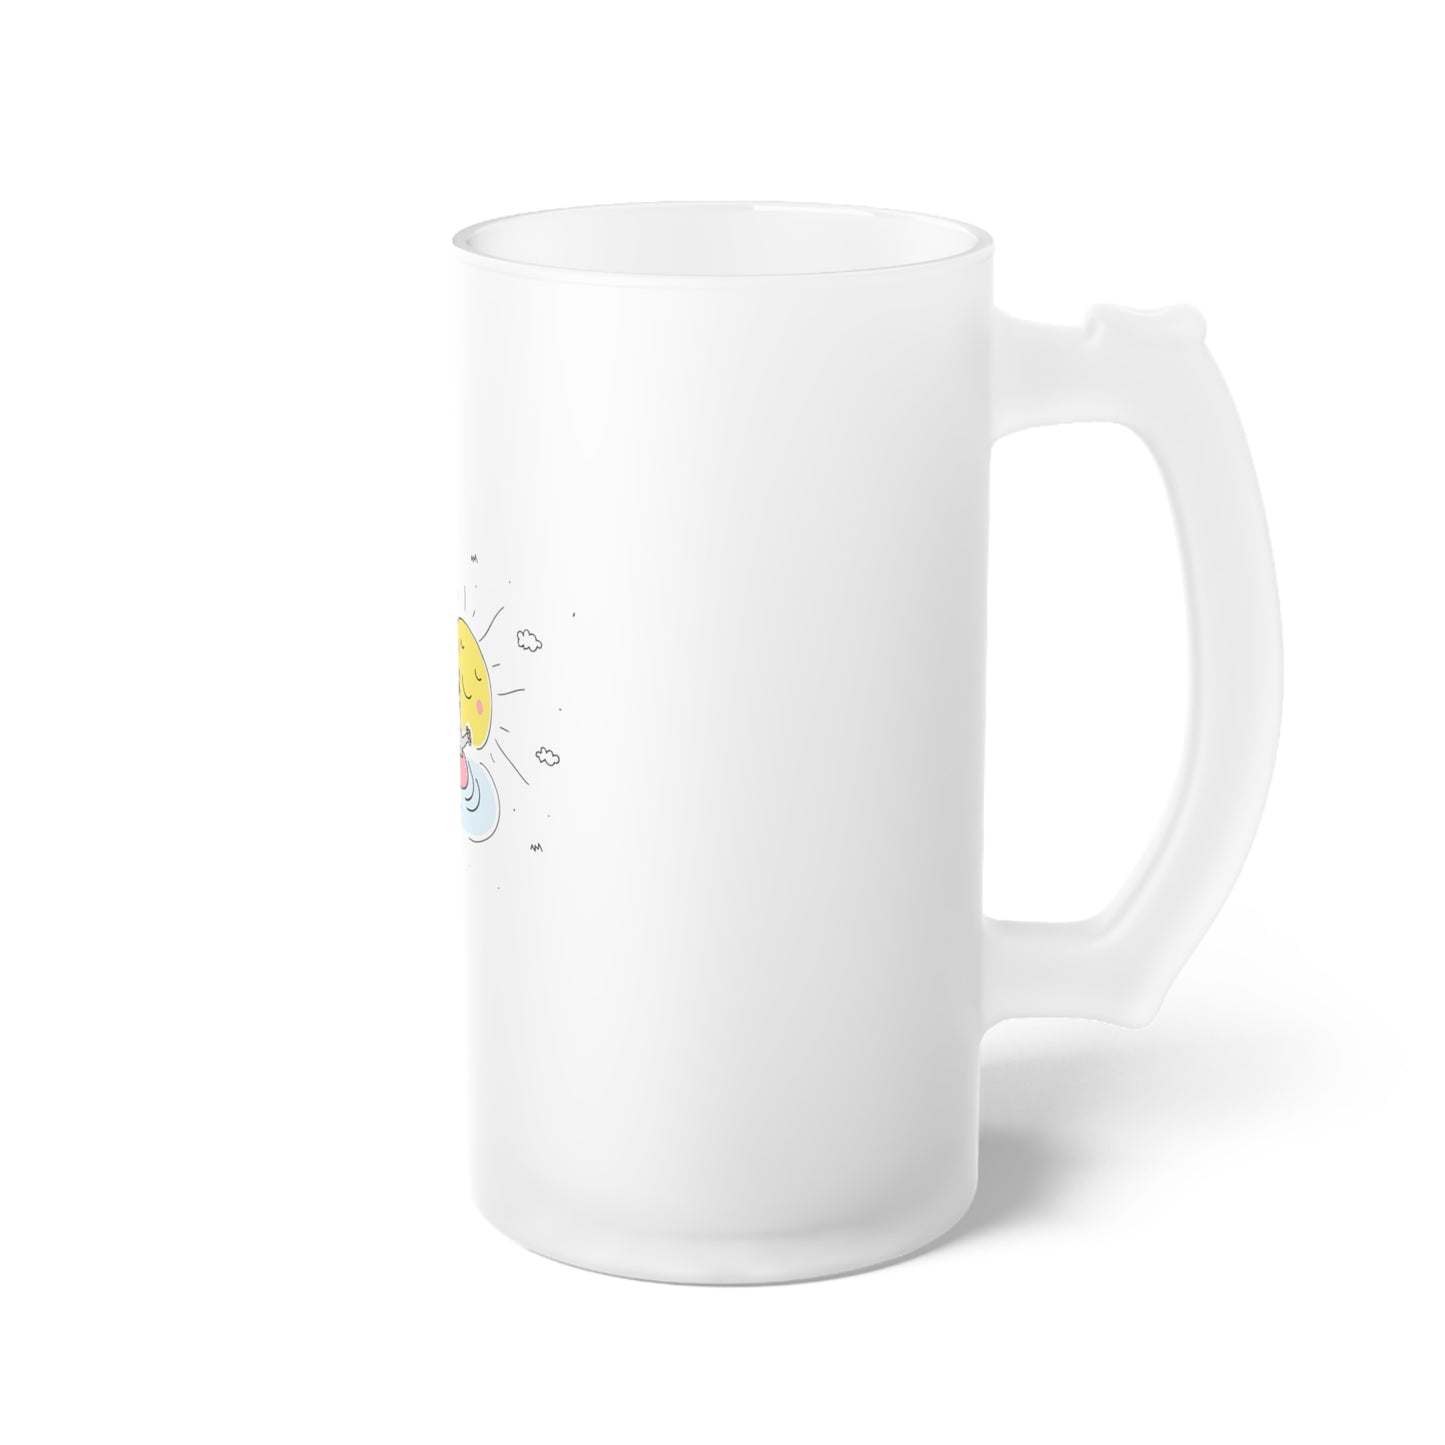 Jingles The Summertime Cat. Frosted Glass Beer Mug